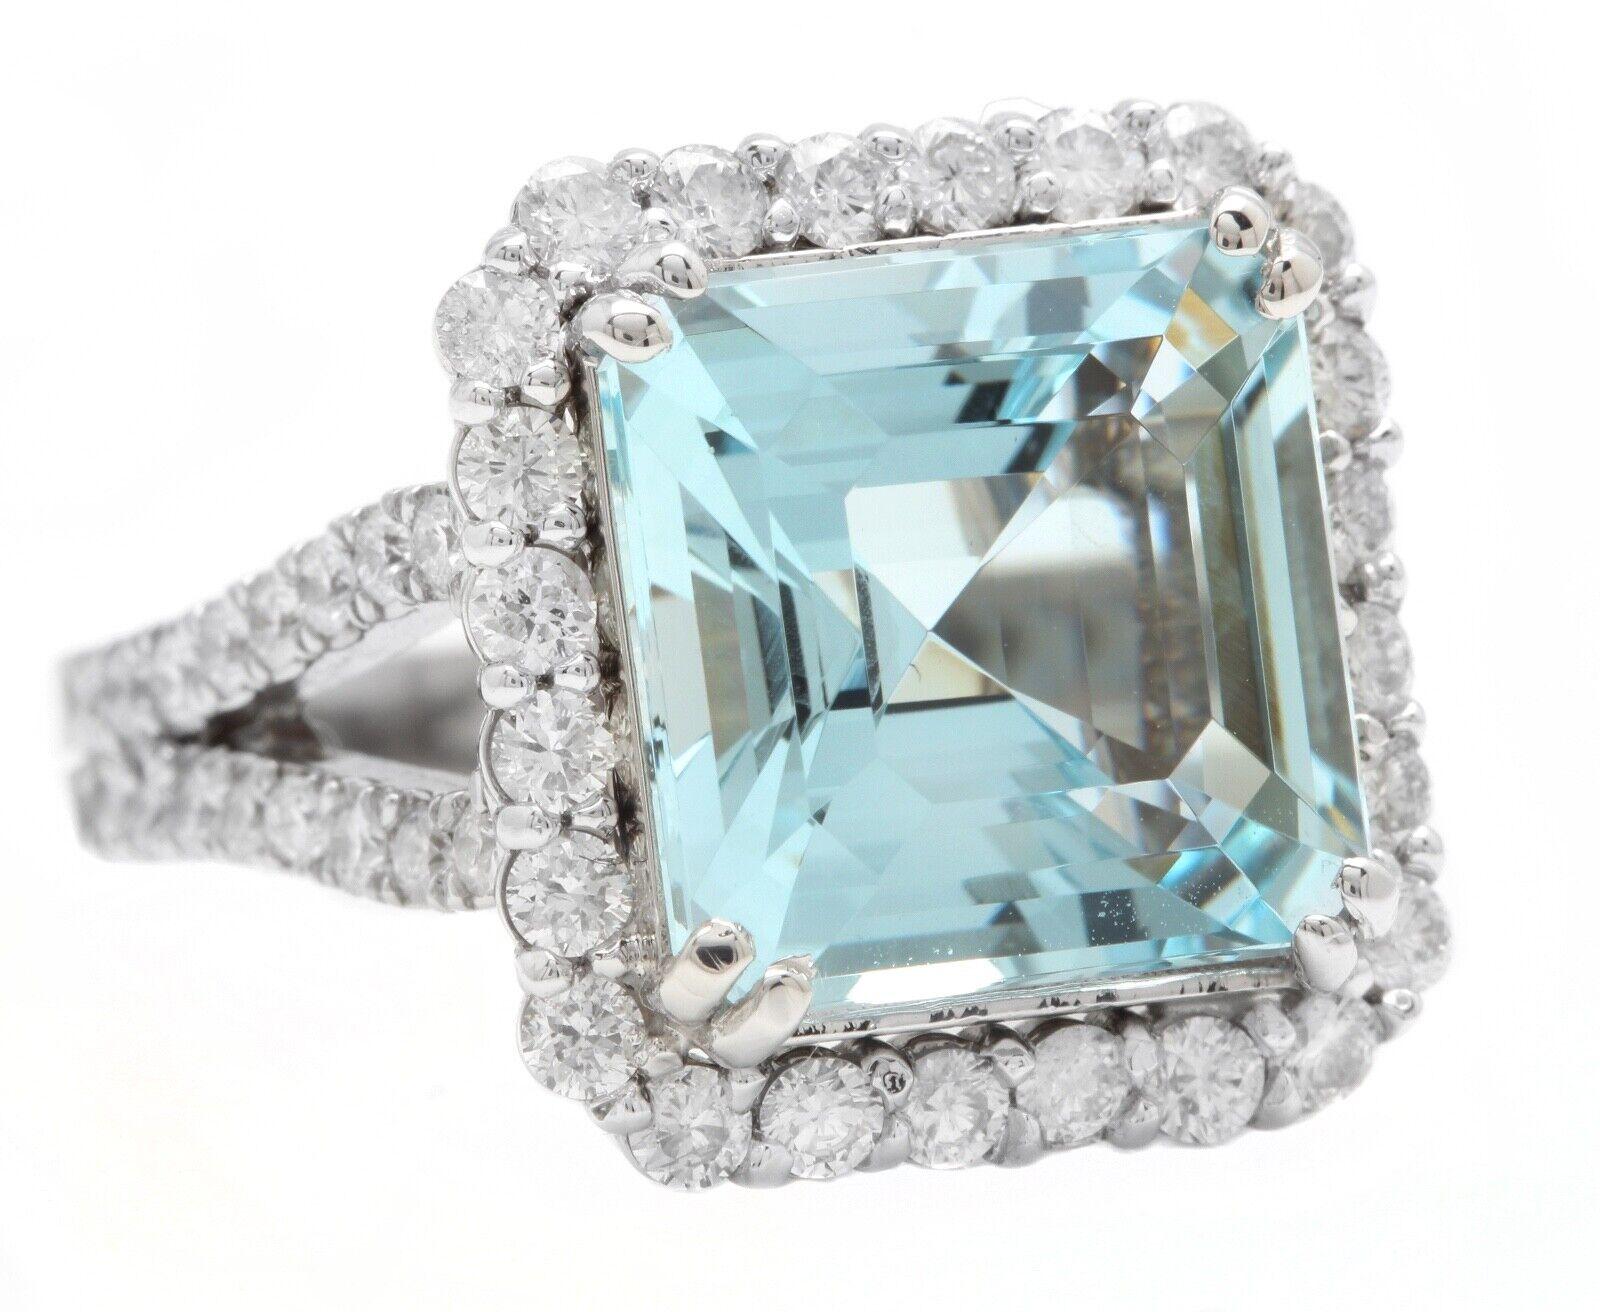 9.50 Carats Natural Aquamarine and Diamond 14K Solid White Gold Ring

Suggested Replacement Value: Approx. $8,000.00

Total Natural Square Step Cut Aquamarine Weights: Approx. 8.00 Carats 

Aquamarine Measures: Approx. 12.00 x 12.00 mm

Natural